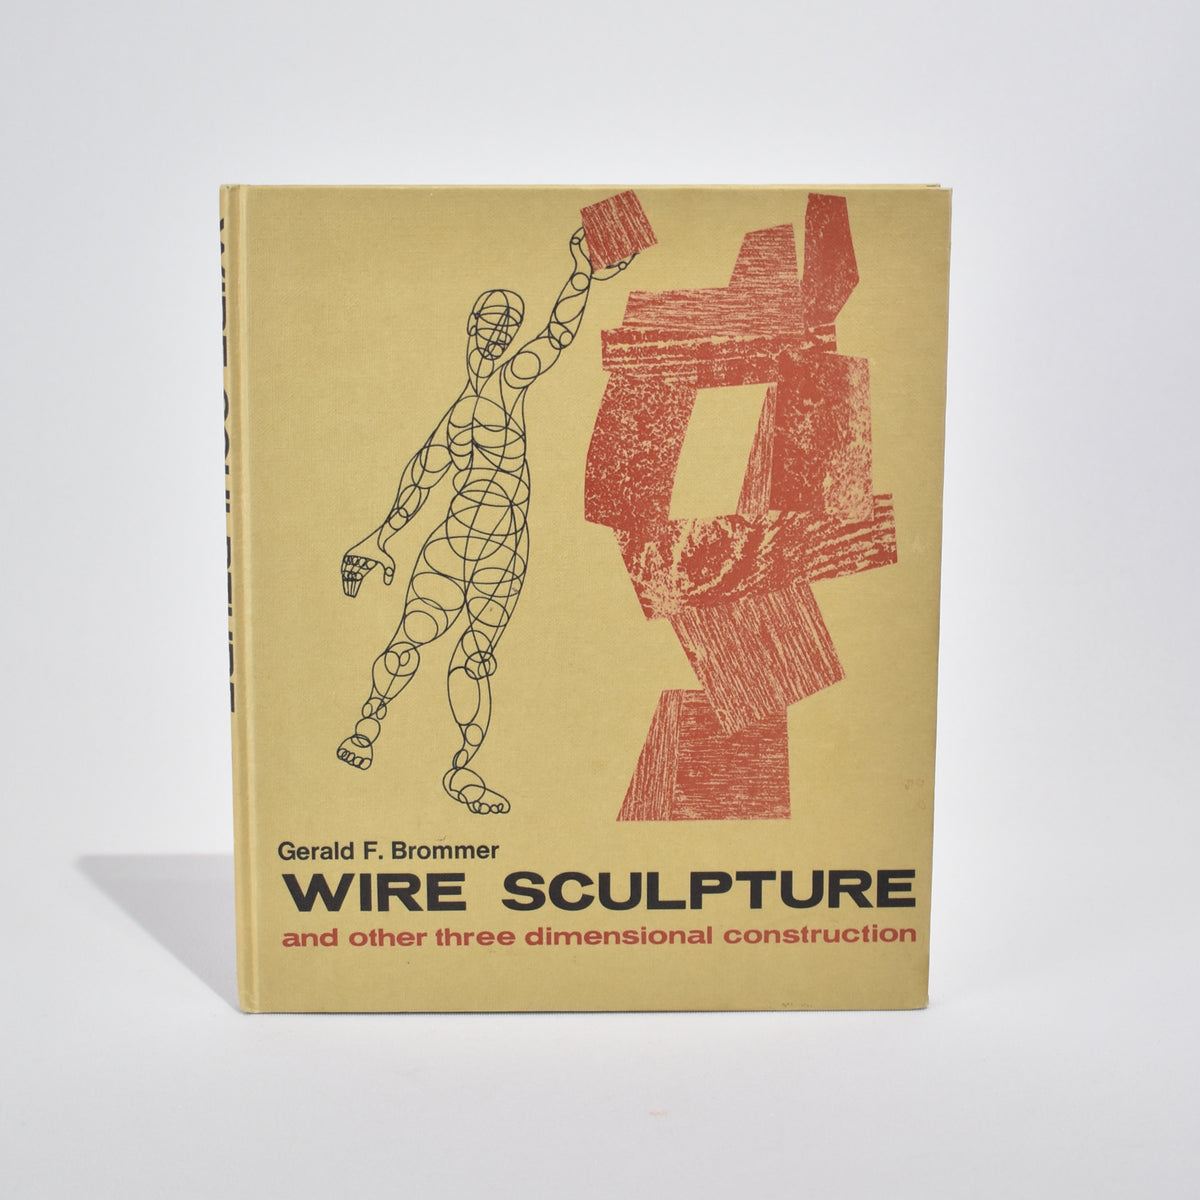 Sculptures, Sculpture wire Octopus, Page 915, Modern and